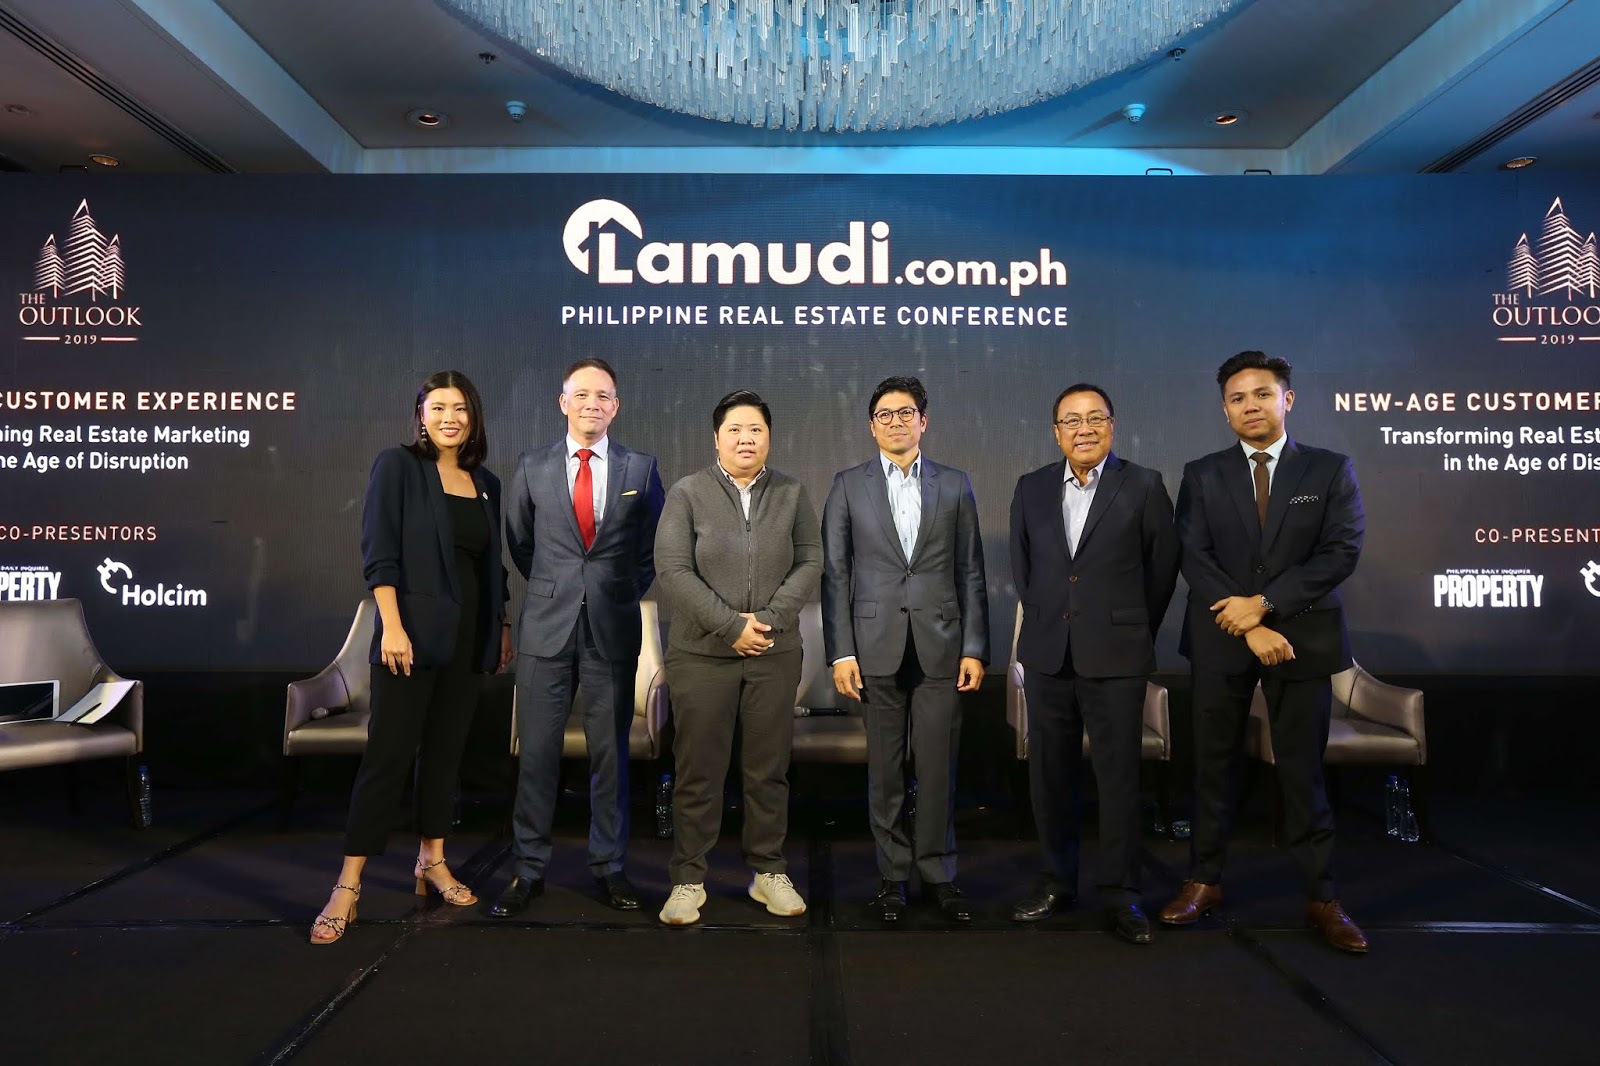 Lamudi's Philippine Real Estate Conference 2019: Shaping the Future of Real Estate